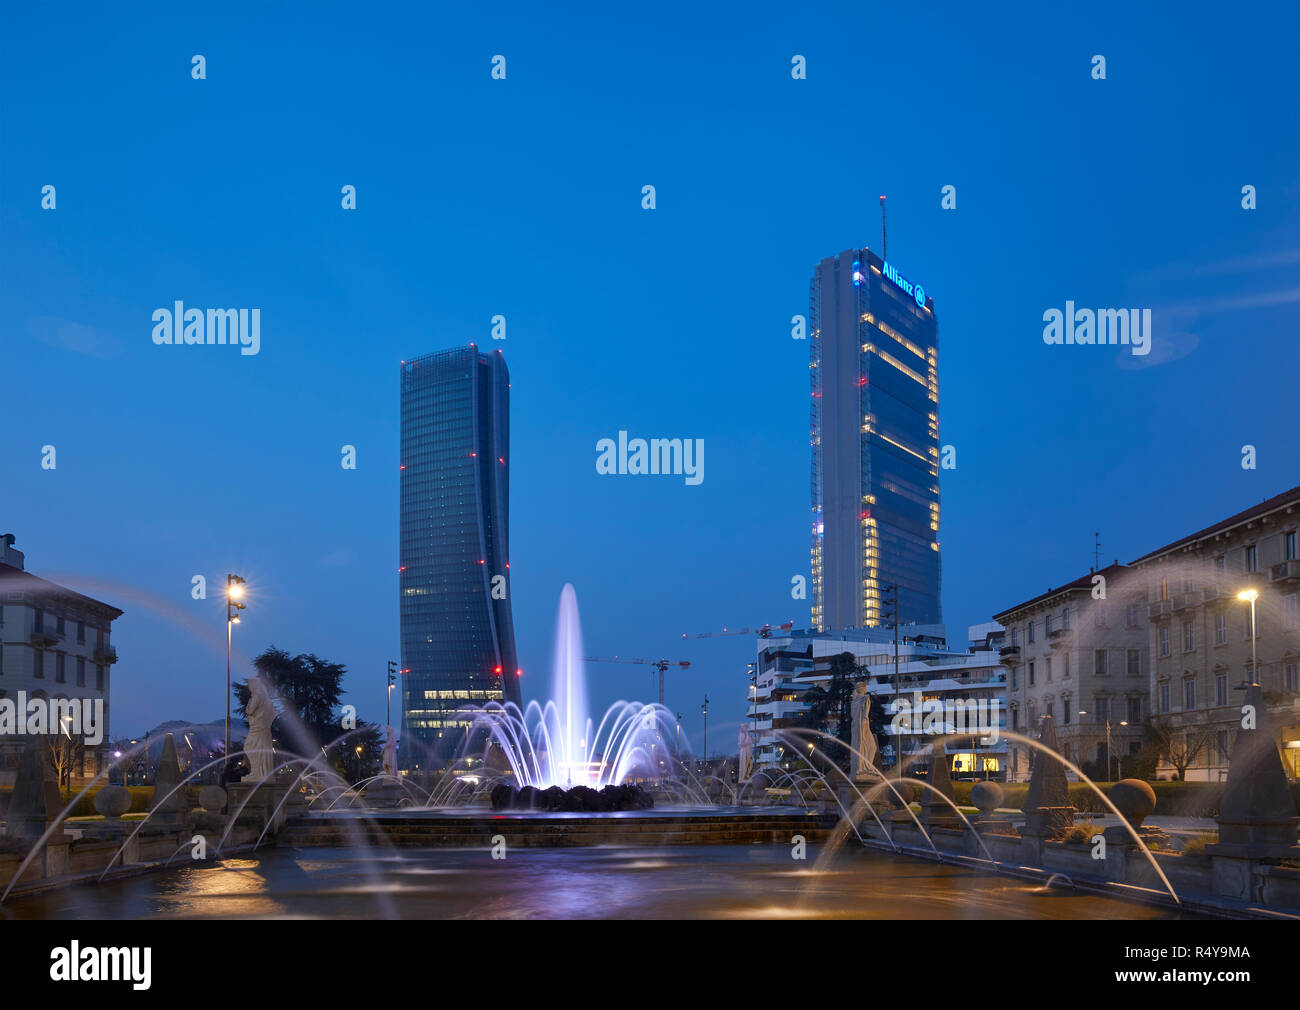 The moder architecture of Citylife district in Milan, Italy Stock Photo